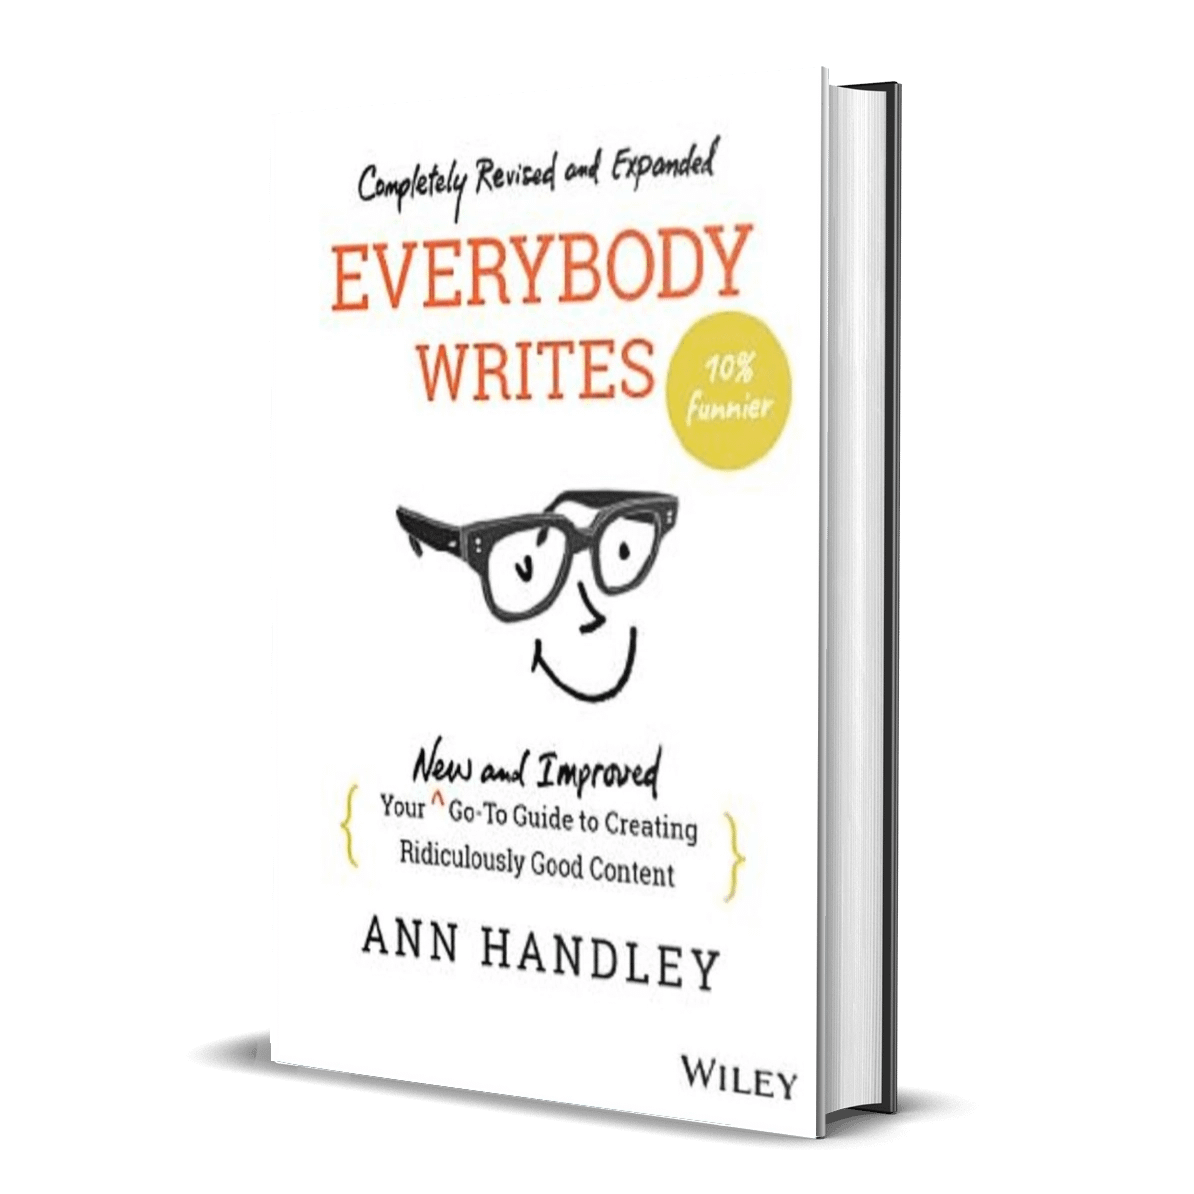 Everybody Writes by Ann Handley is considered one of the best books for blogging.